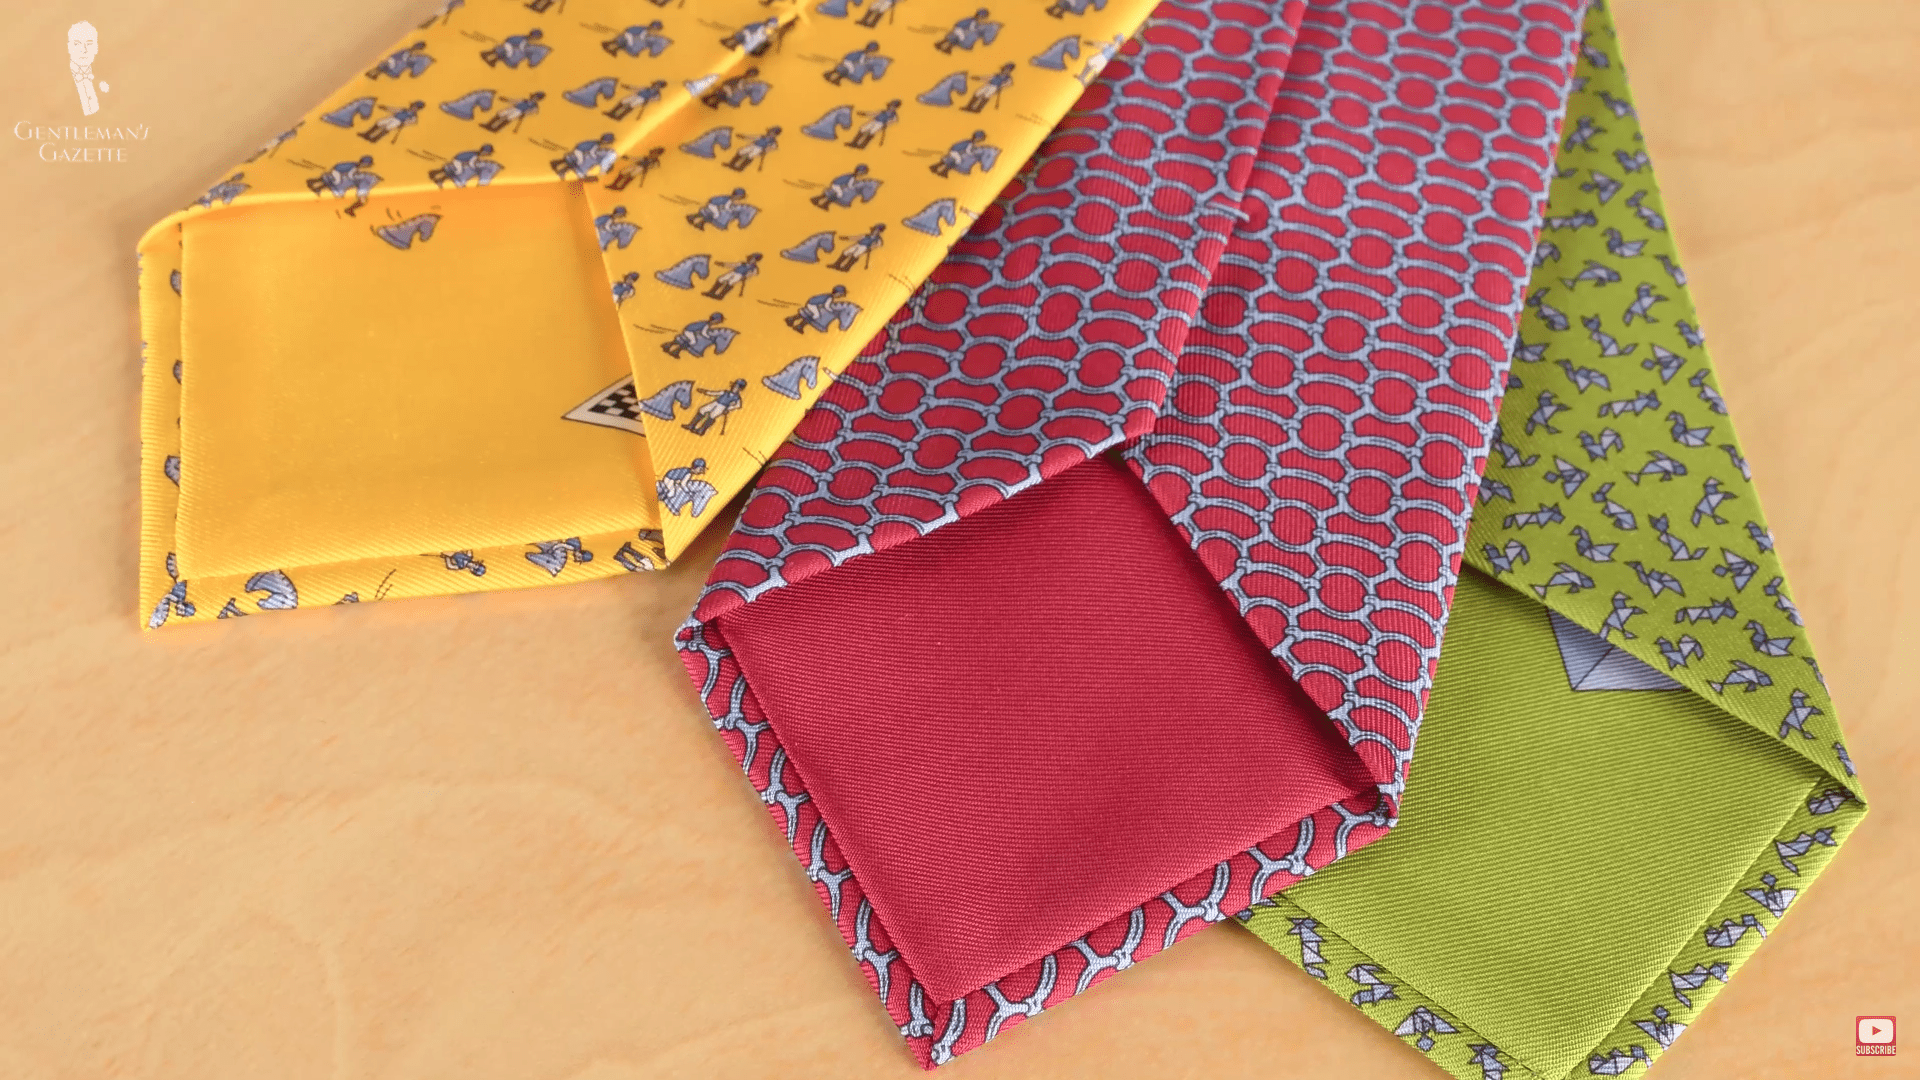 hermes tie and pocket square